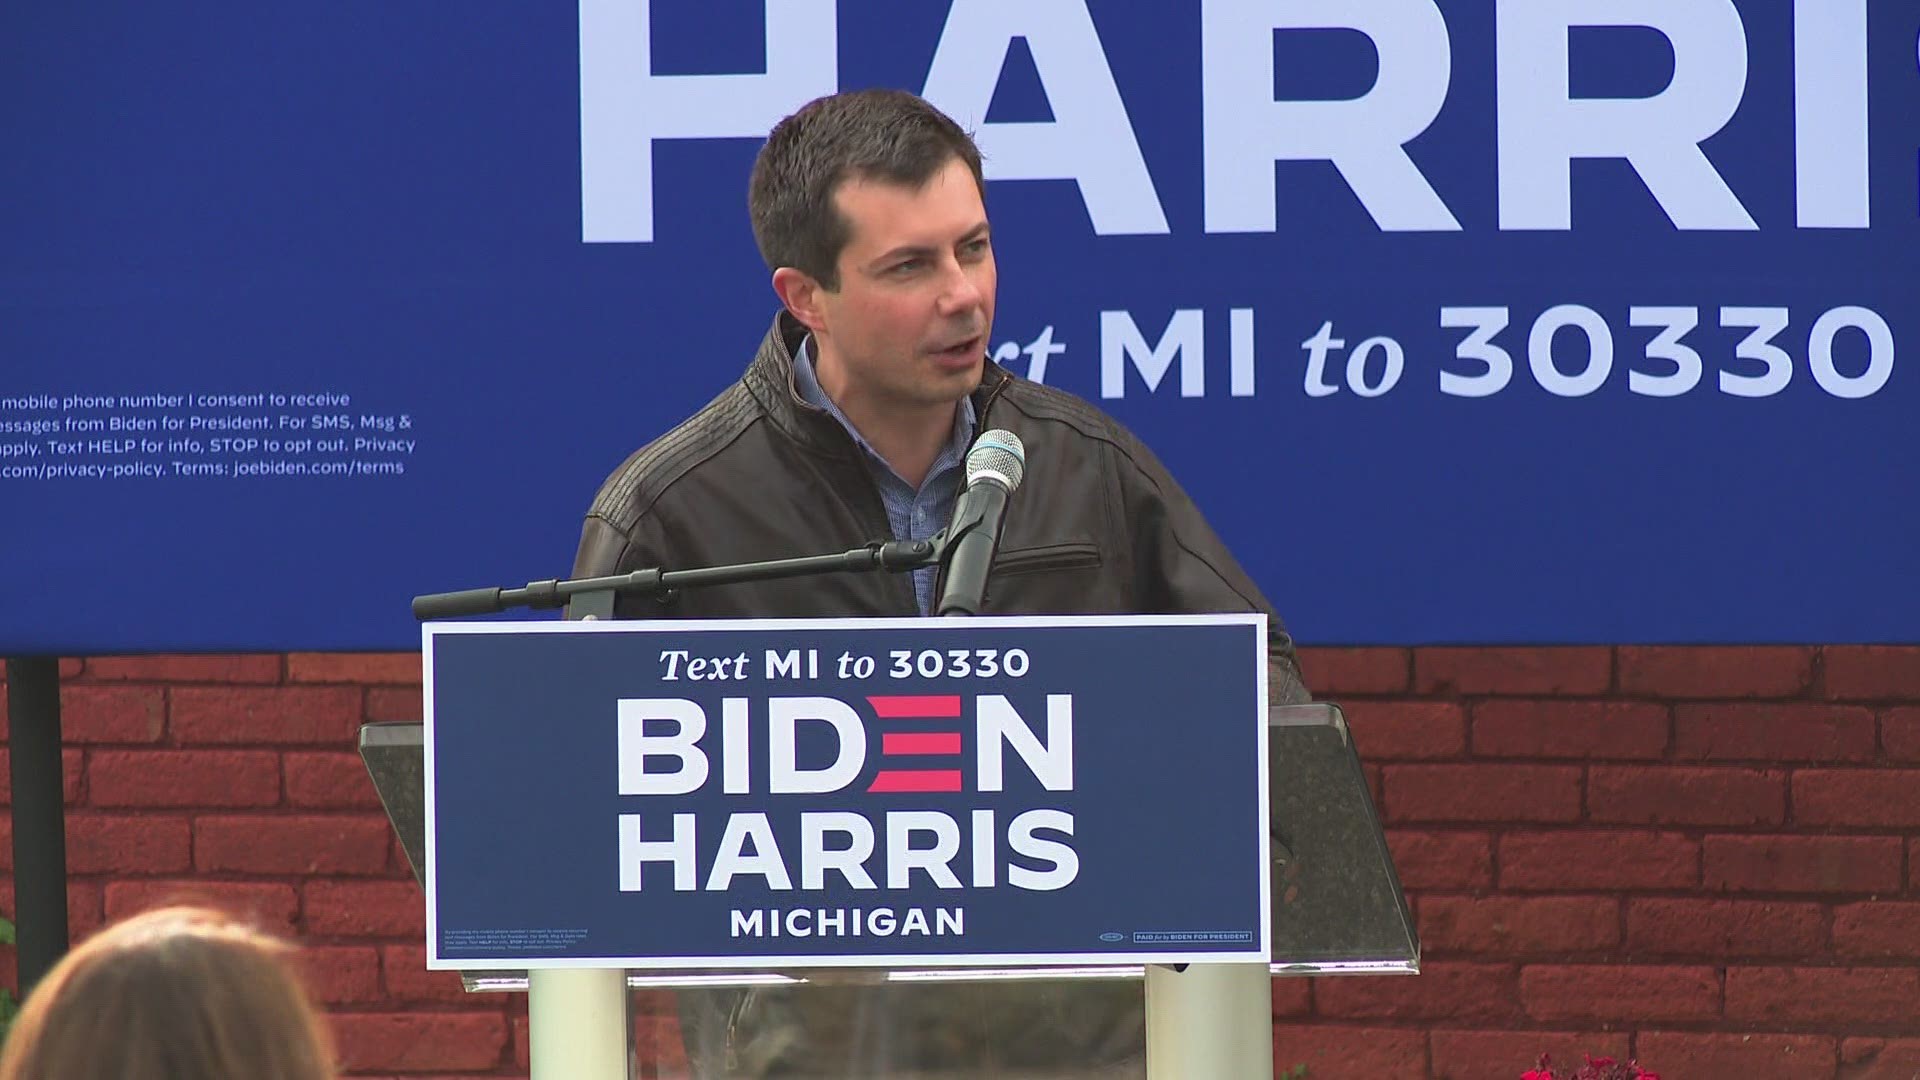 Former presidential candidate Pete Buttigieg was in Grand Rapids campaigning for Joe Biden on Monday.